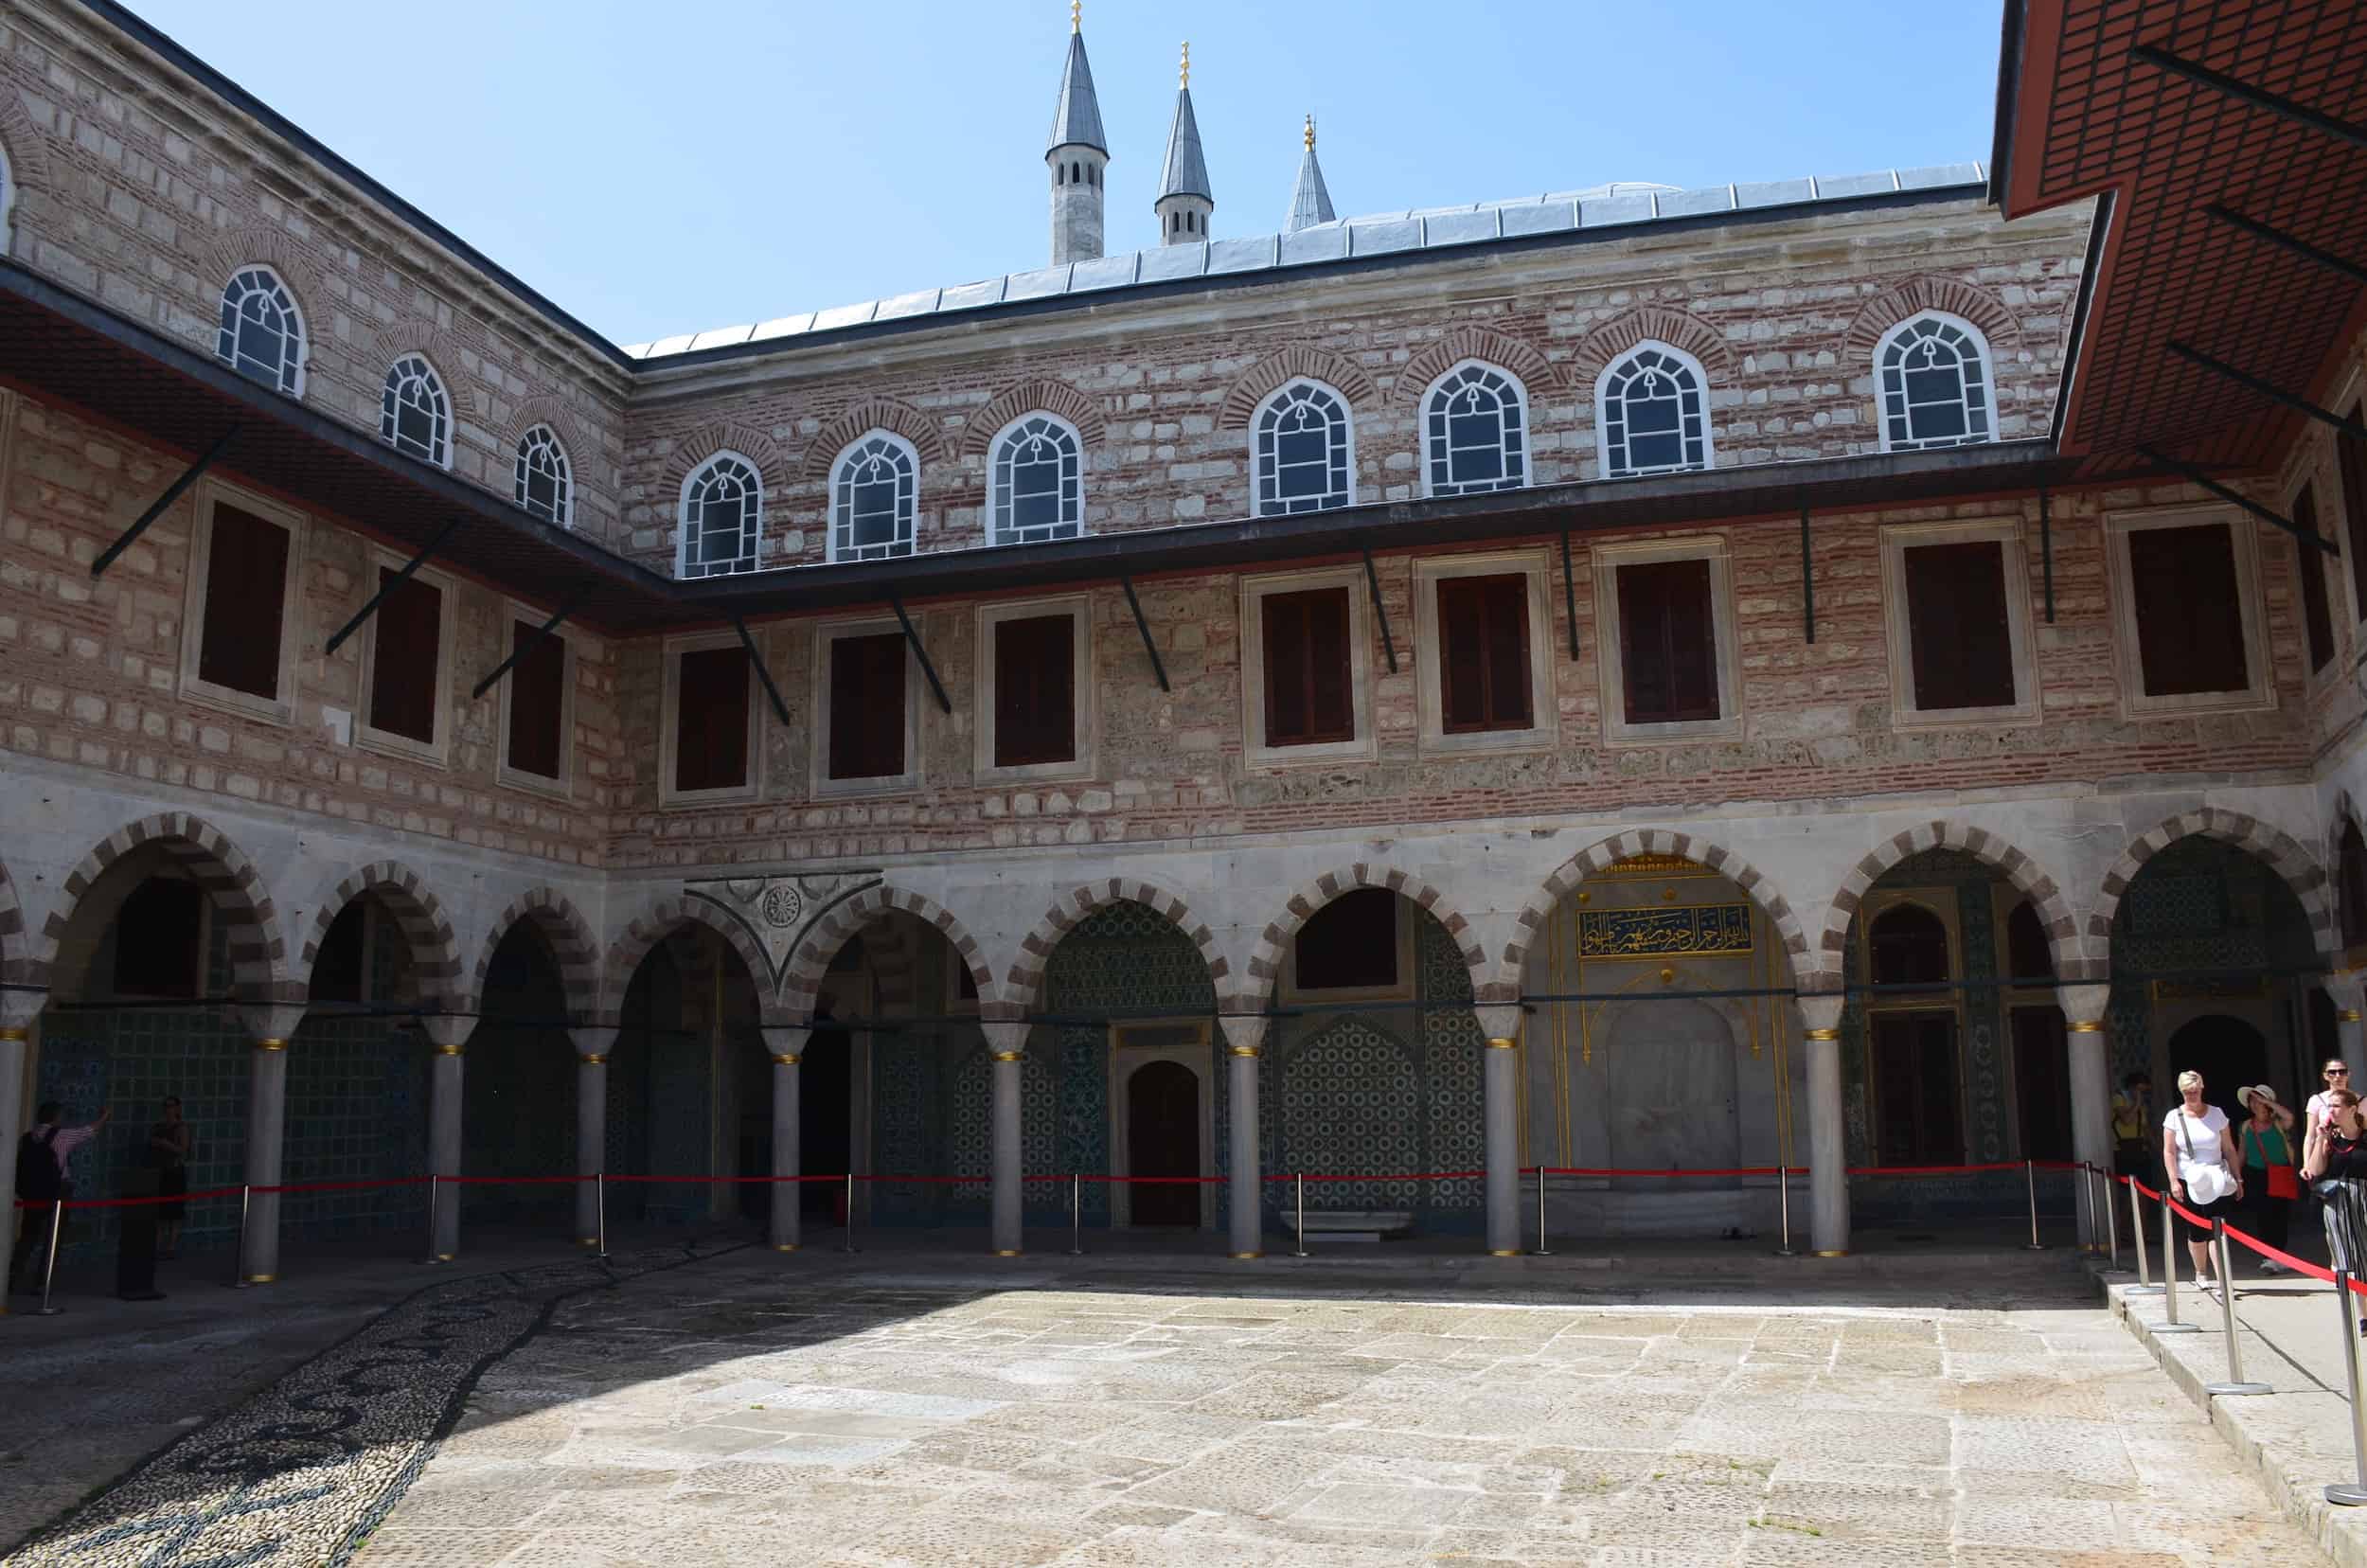 Courtyard of the Queen Mother in the Imperial Harem at Topkapi Palace in Istanbul, Turkey